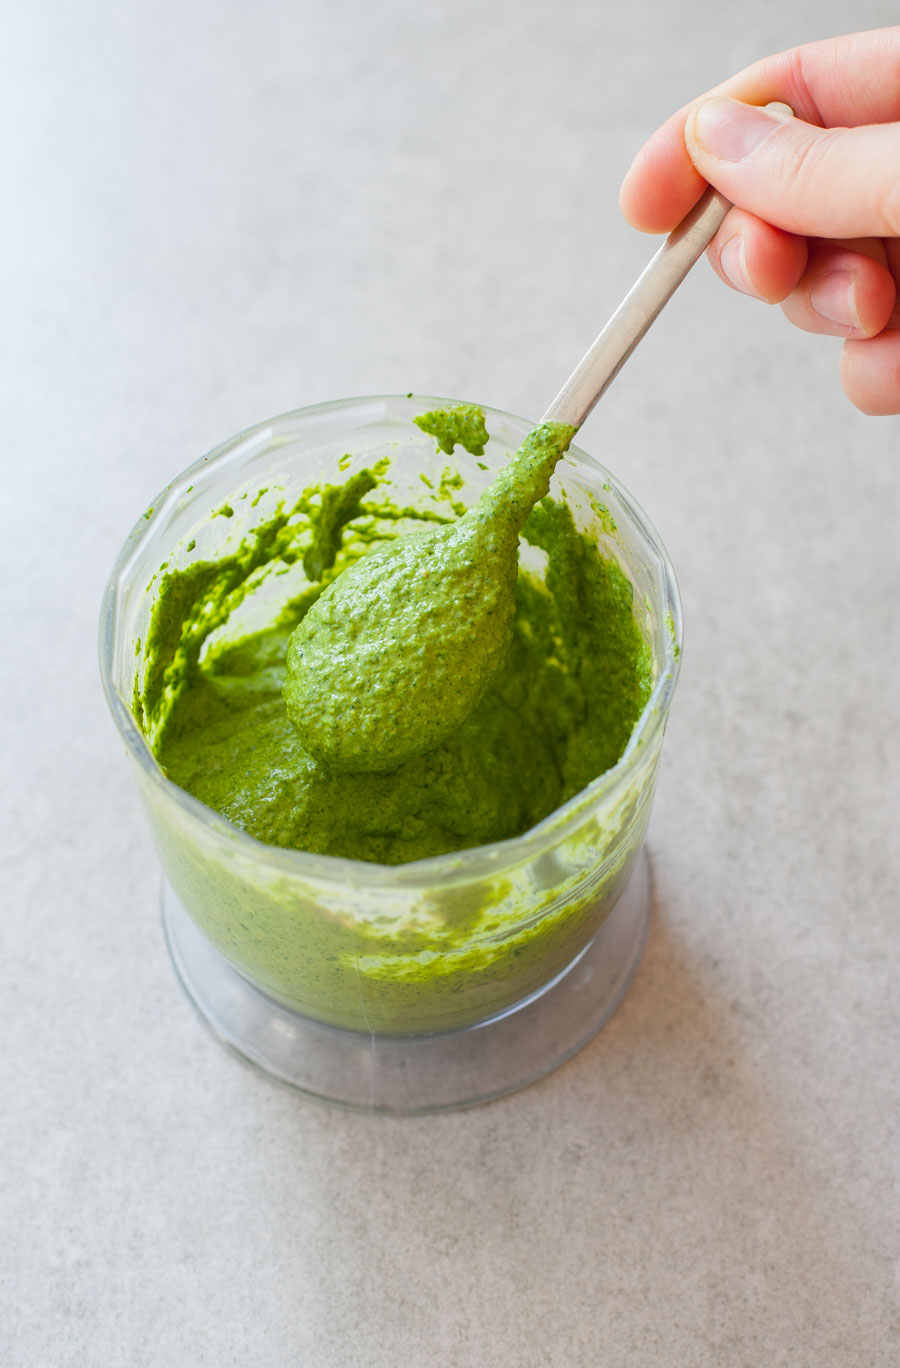 green tahini sauce in a food processor container spooned on a teaspoon